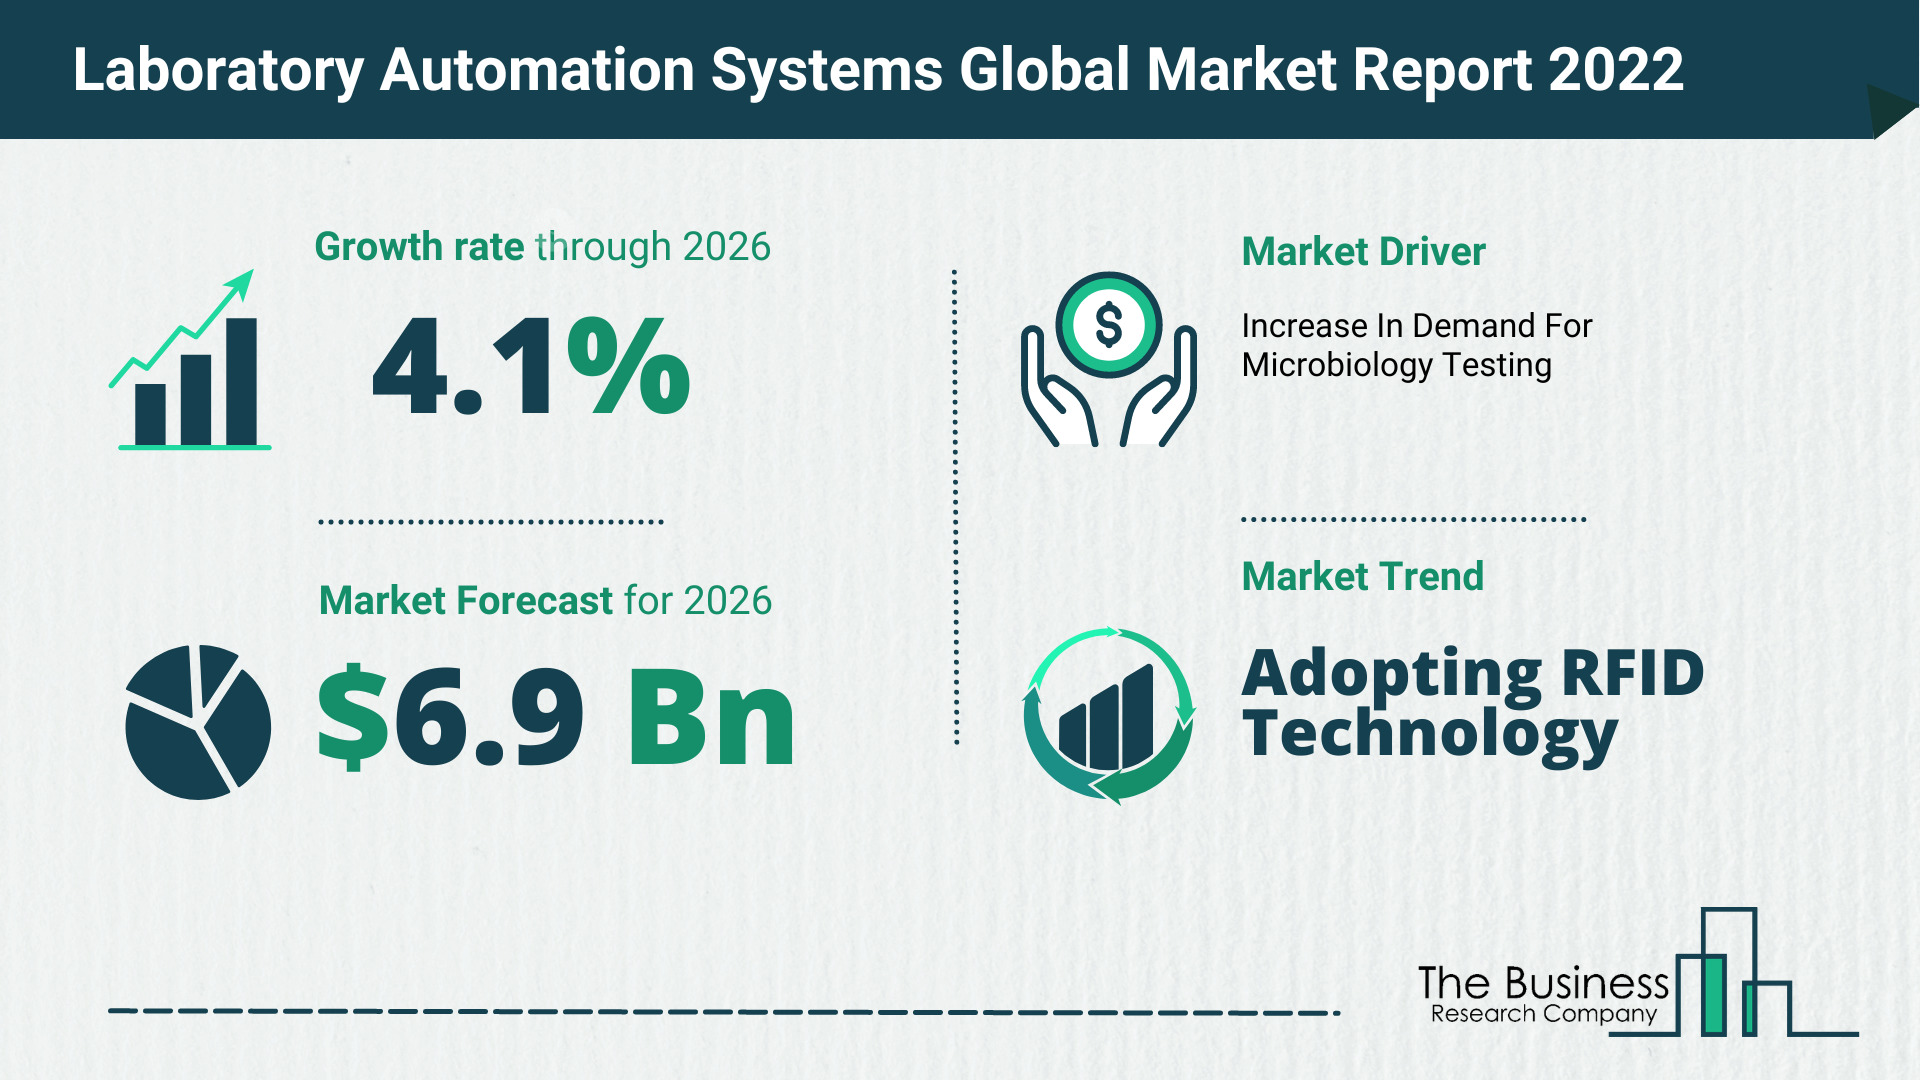 How Will The Laboratory Automation Systems Market Grow In 2022?